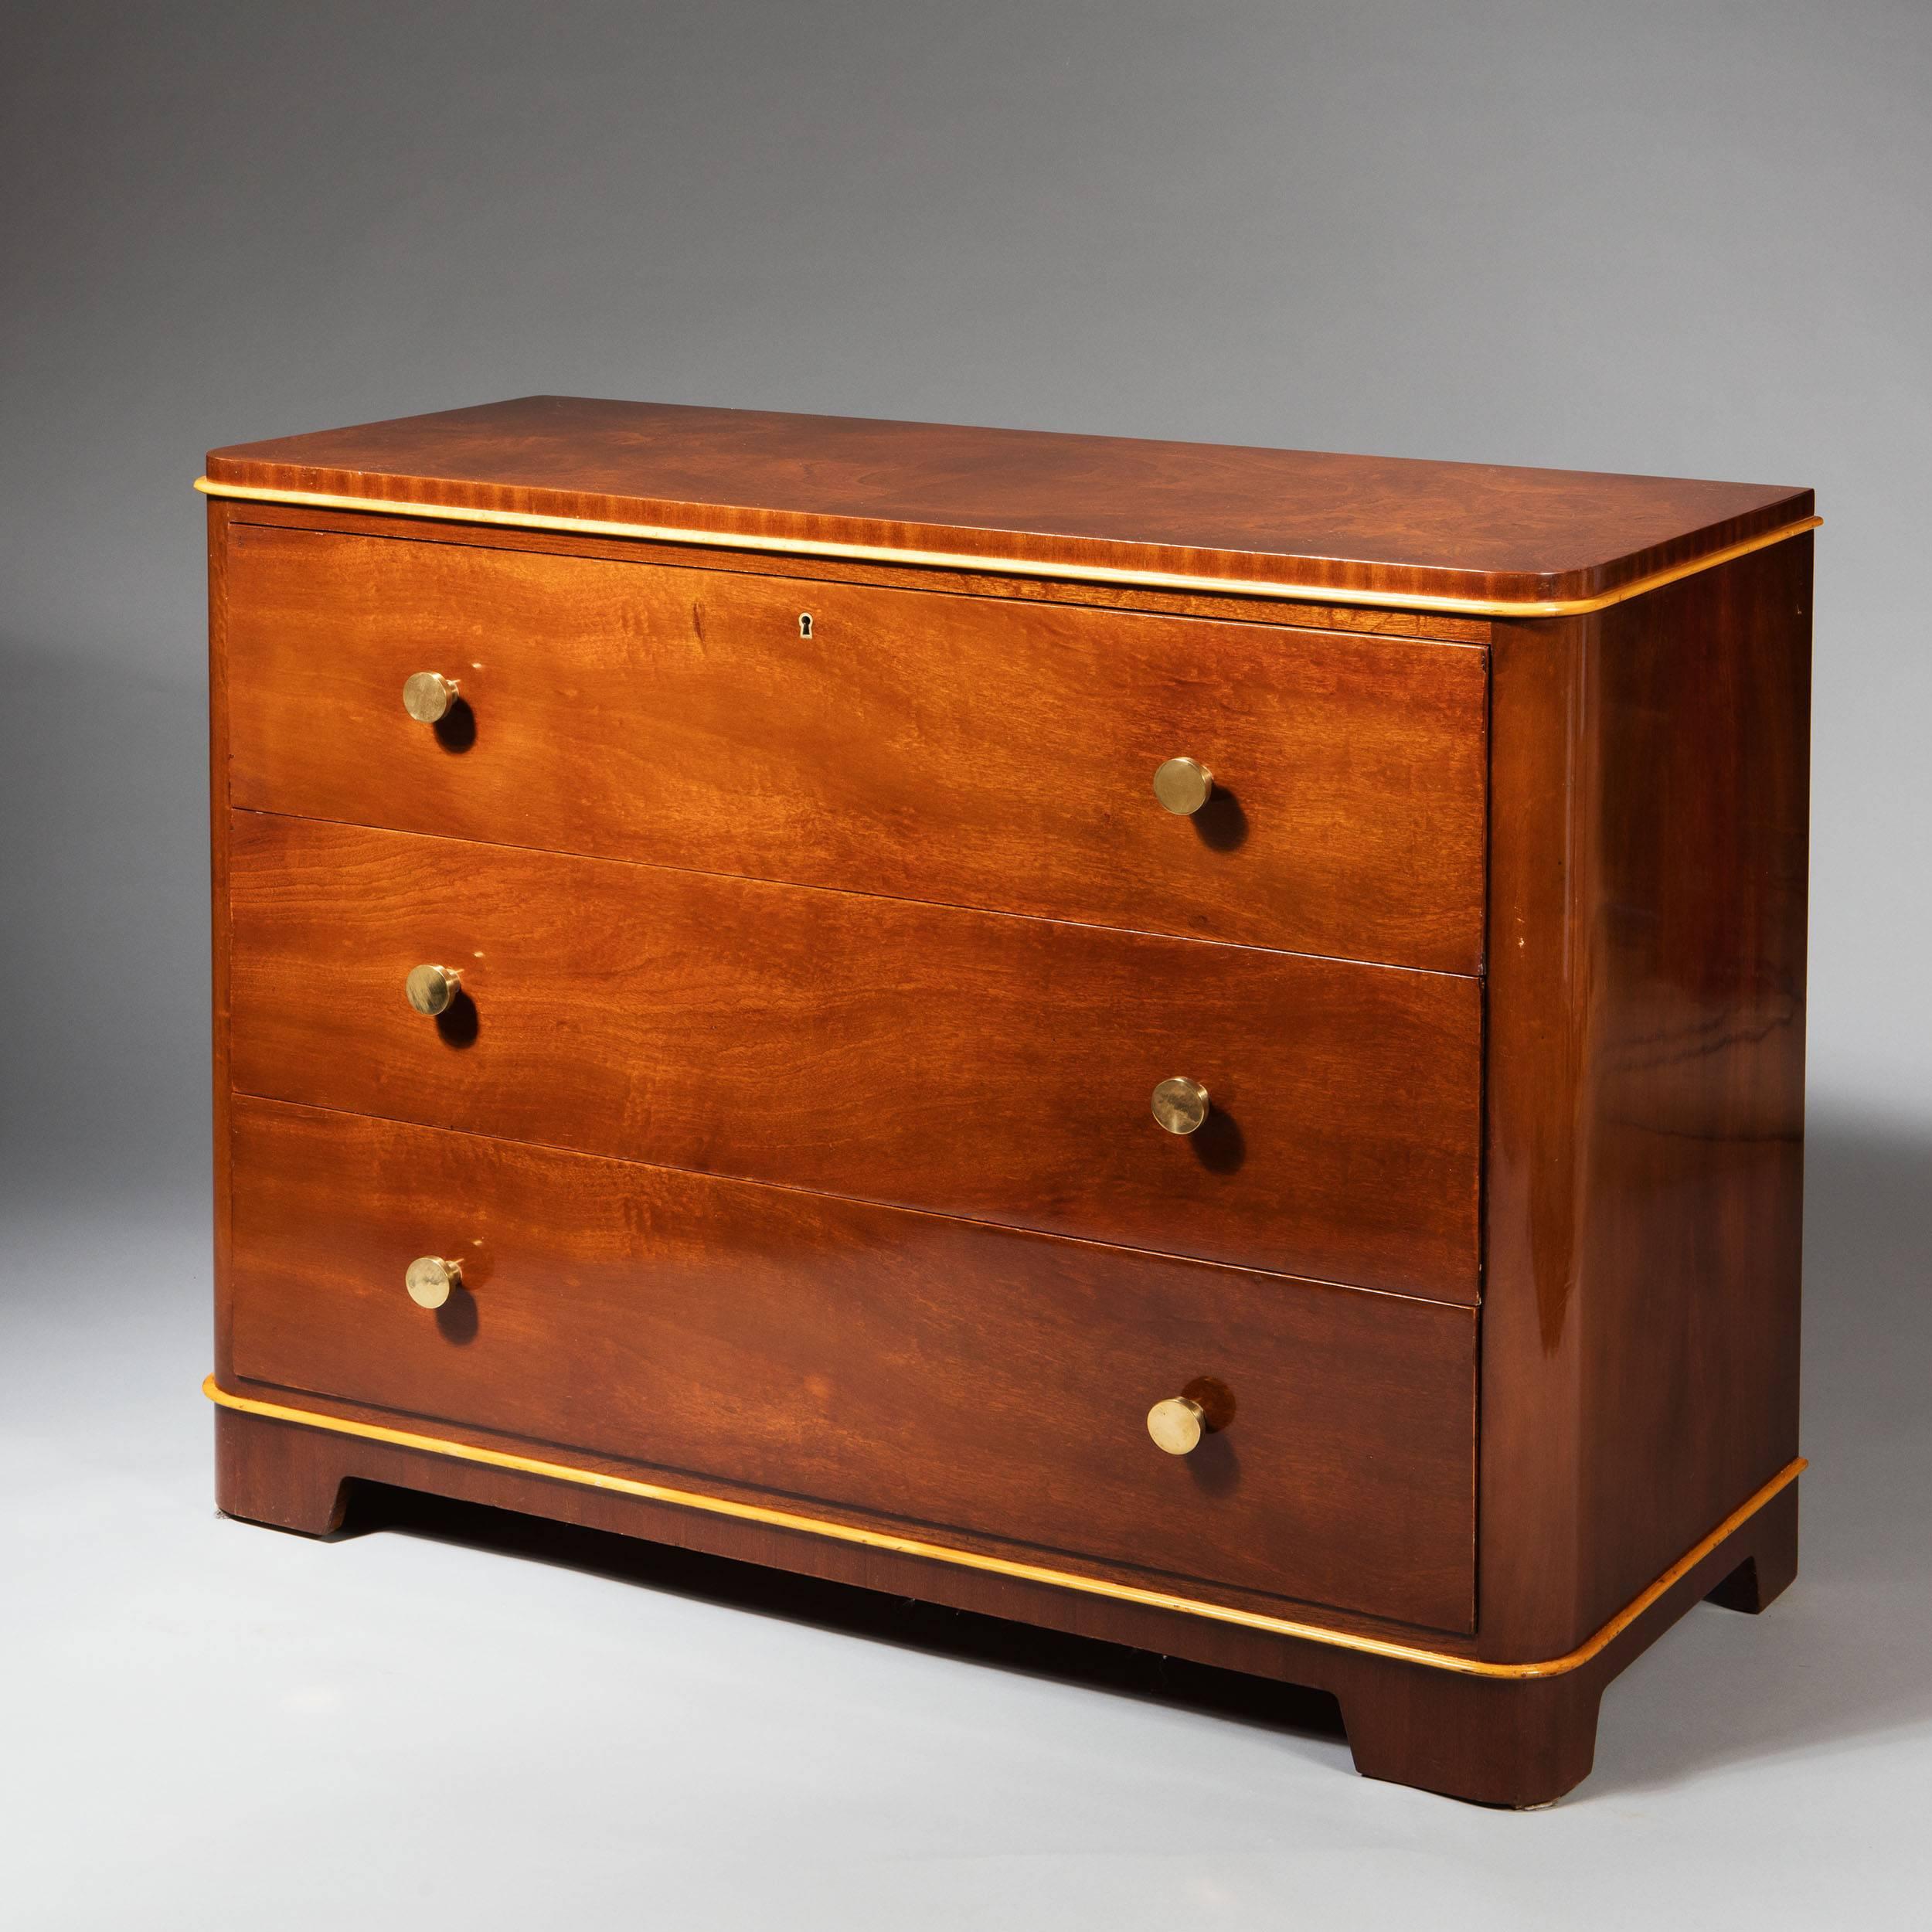 A pair of Art Deco mahogany and lemon-wood commodes. by DE COENE FRERES

France, circa 1925

These two commodes were produced by DE COENE Frères, Courtrai, in Belgium. The commodes are part of a De Coene bedroom suite, model JACQUELINE.

We are